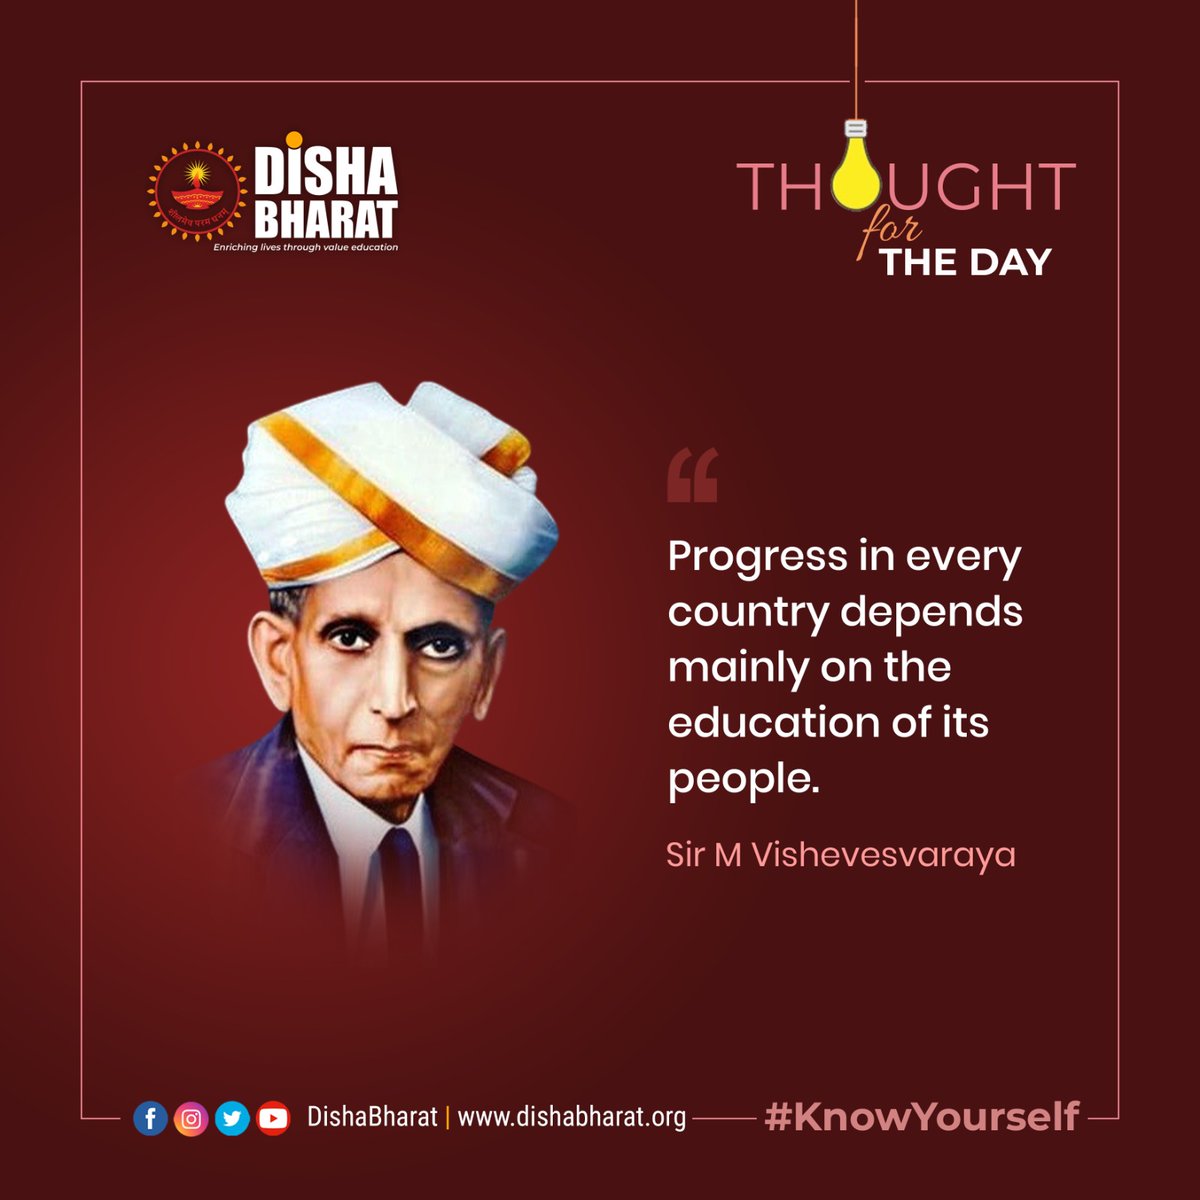 Progress in every country depends mainly on the education of its people. Sir M Visvesvaraya